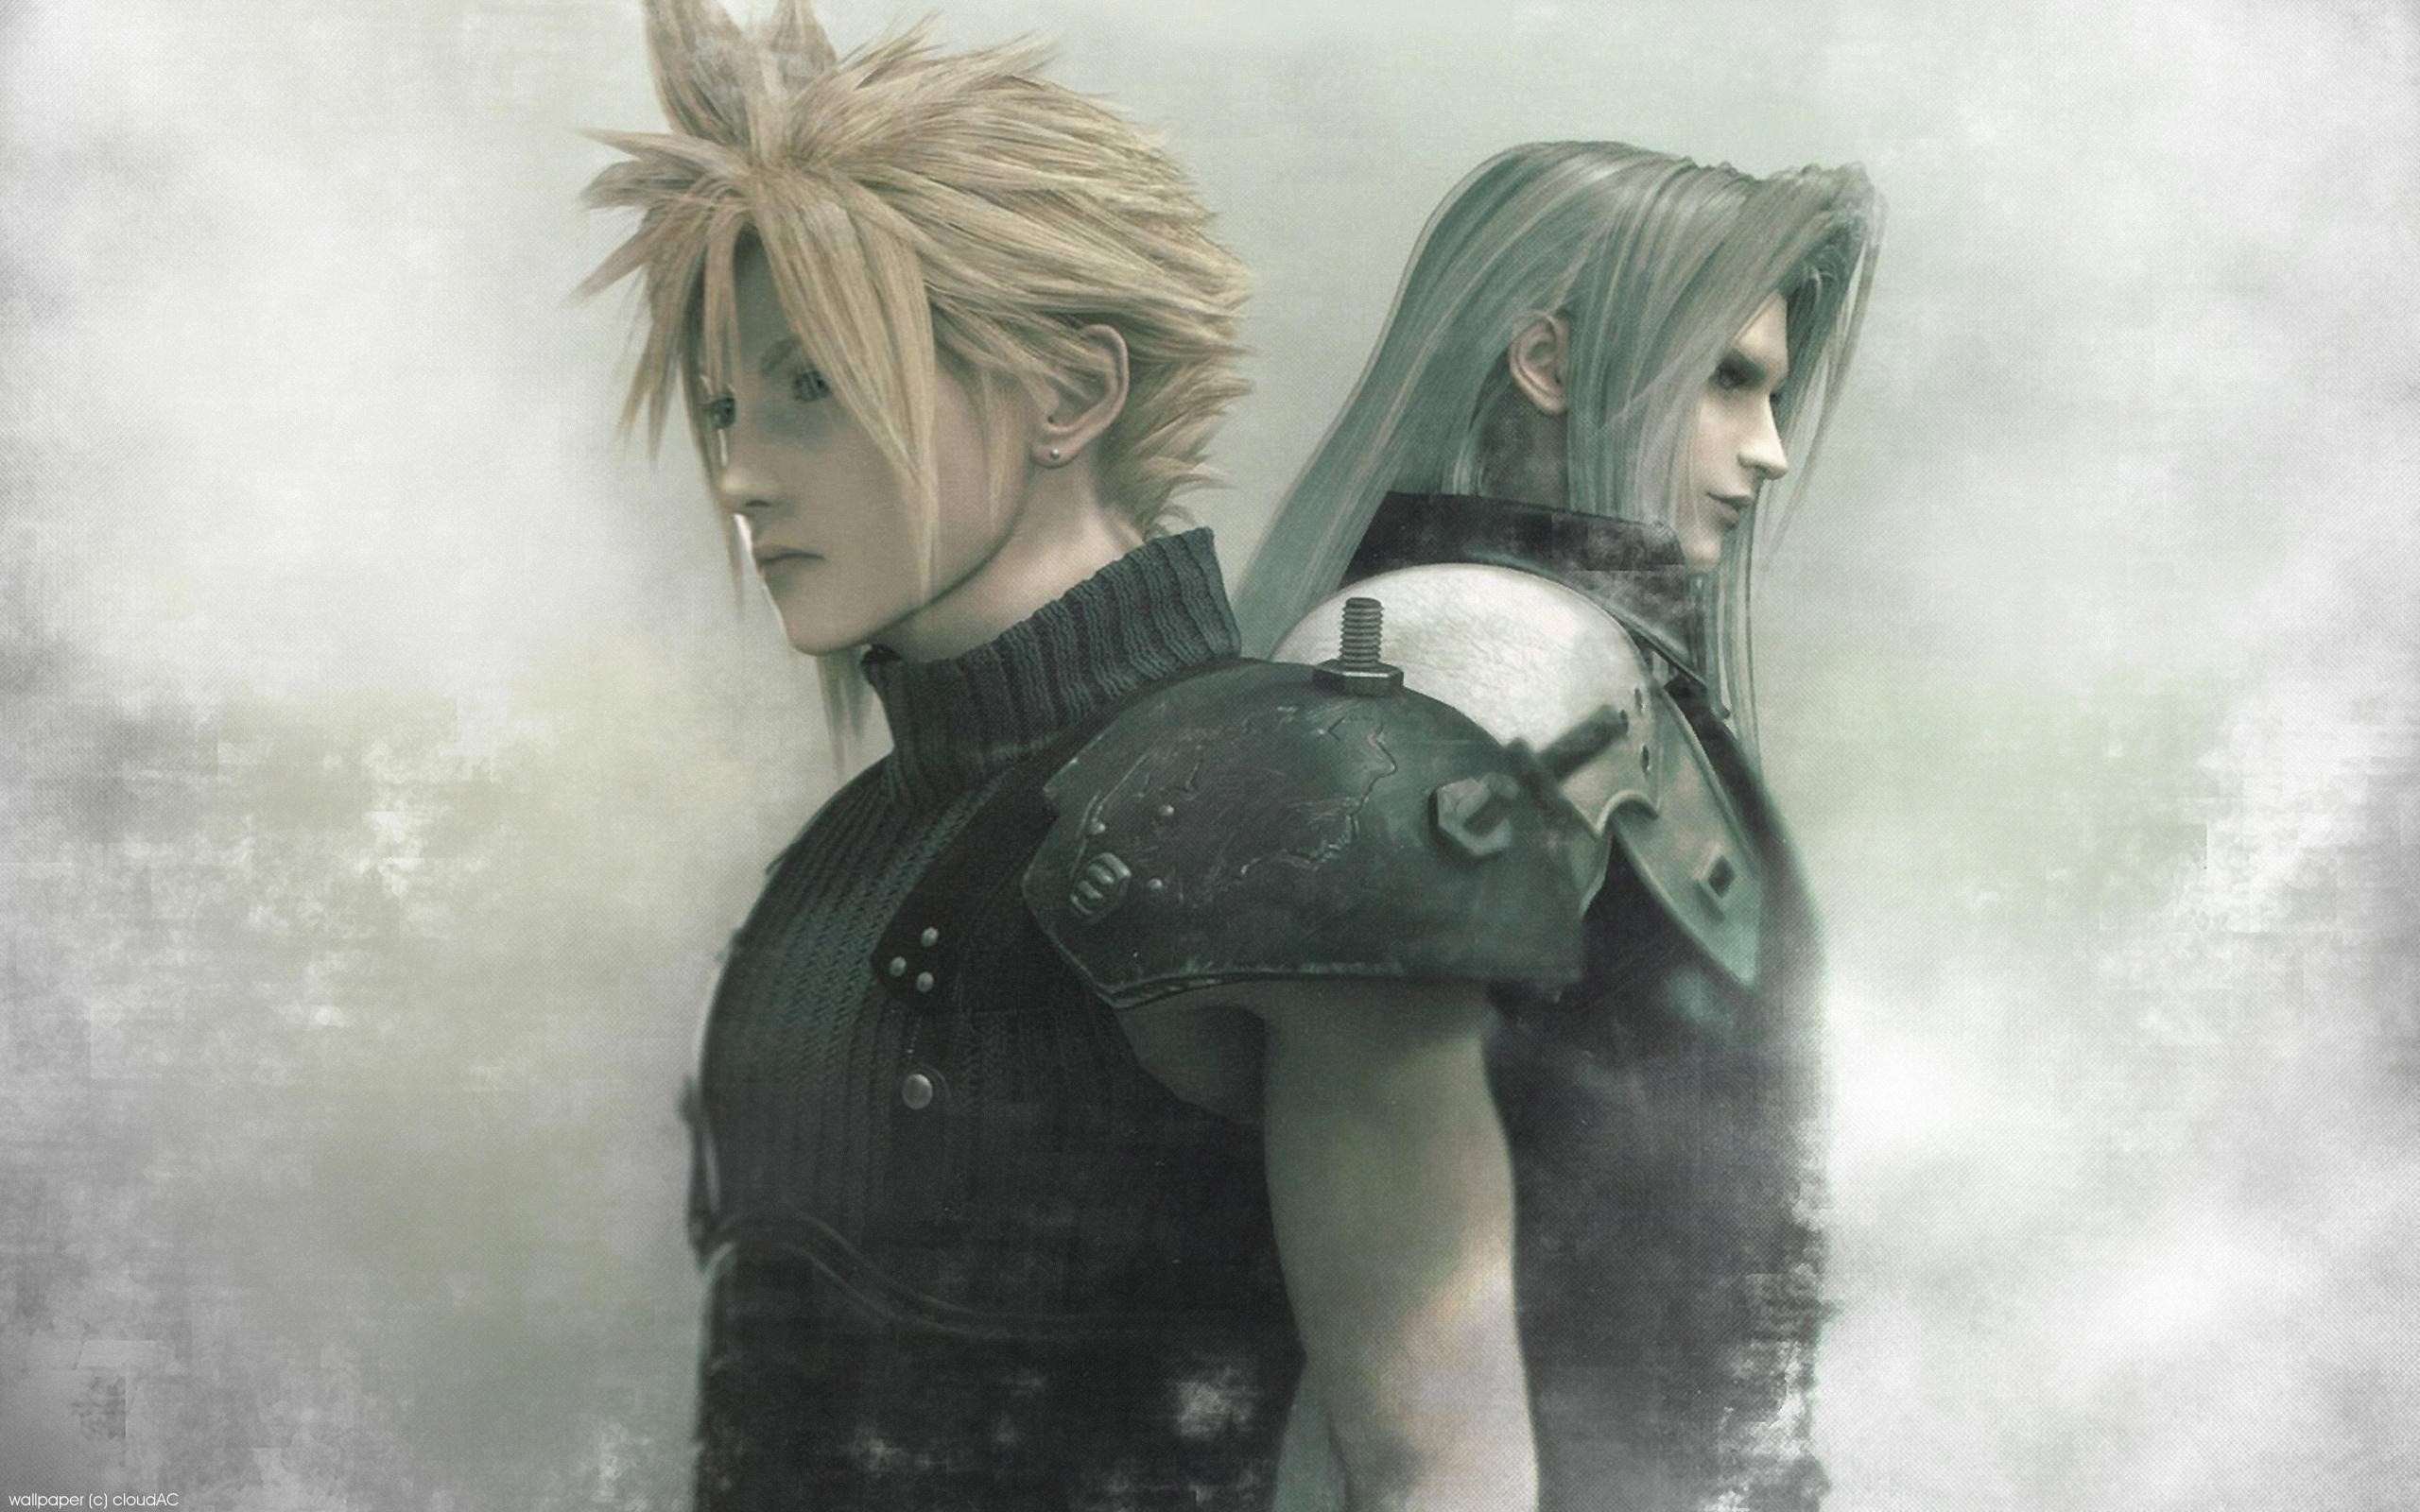  Cloud  and Sephiroth  Wallpaper  68 images 